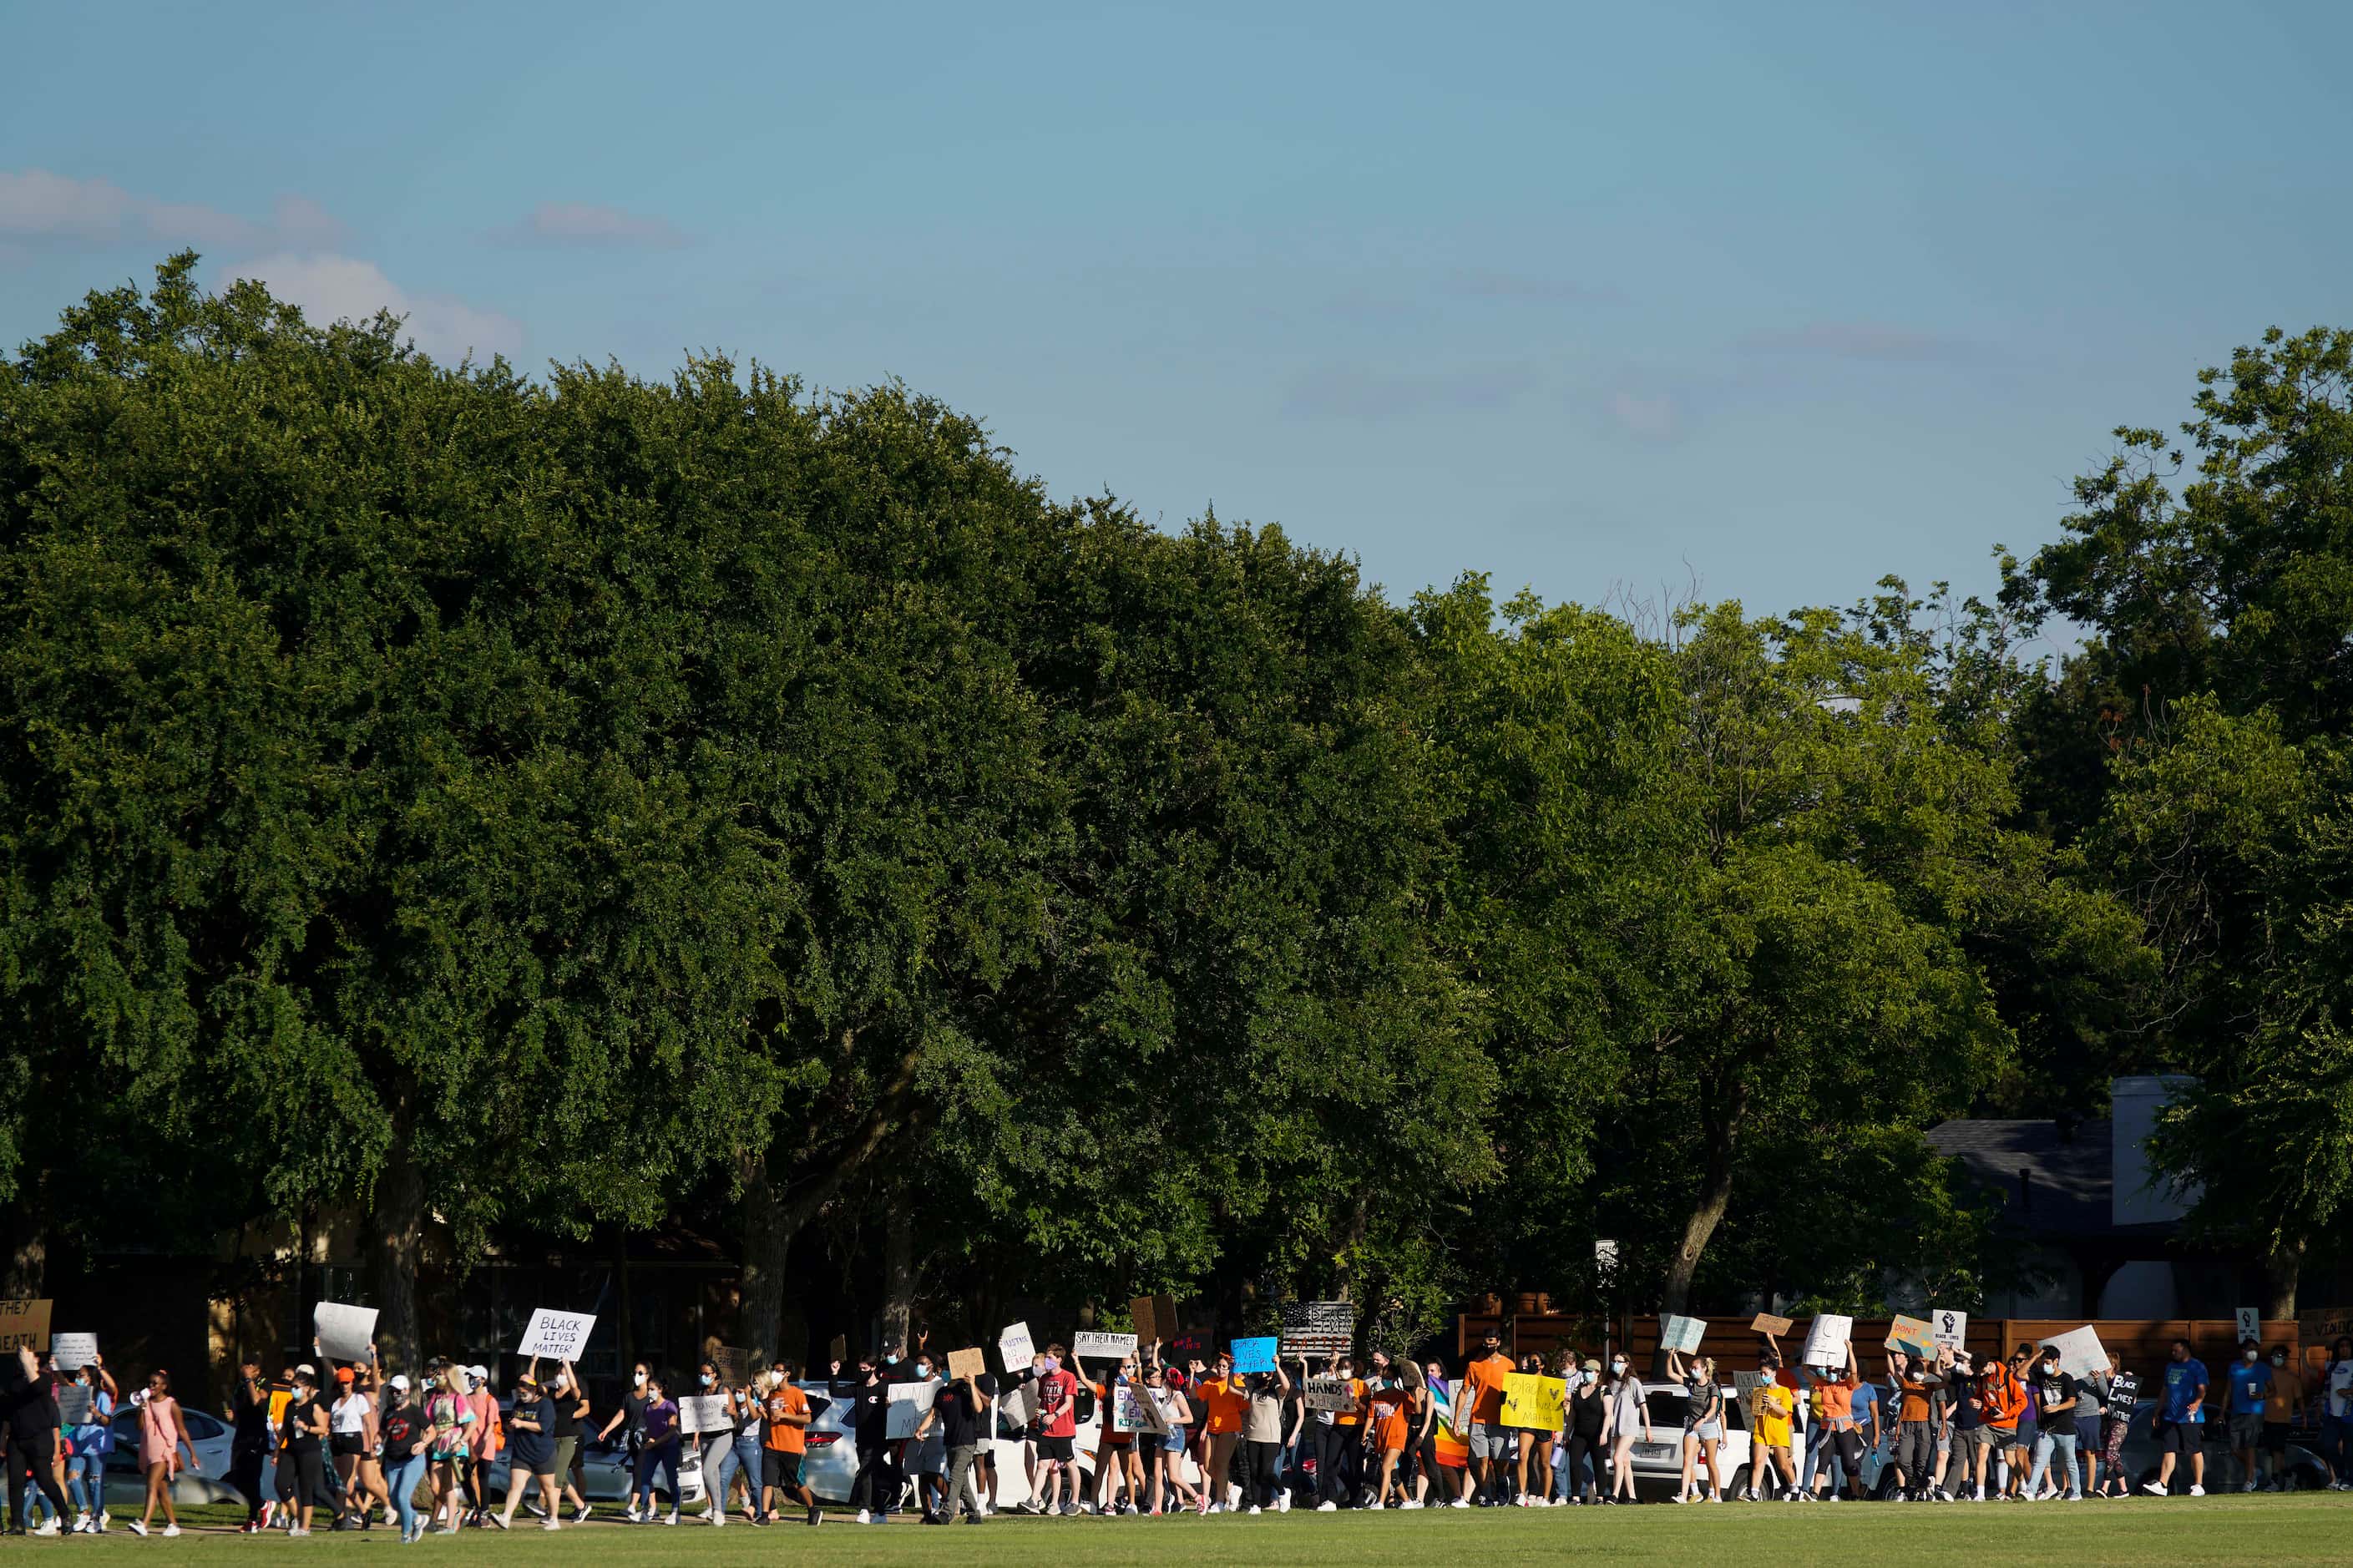 Demonstrators march around the perimeter of Berkner Park during a protest organized by...